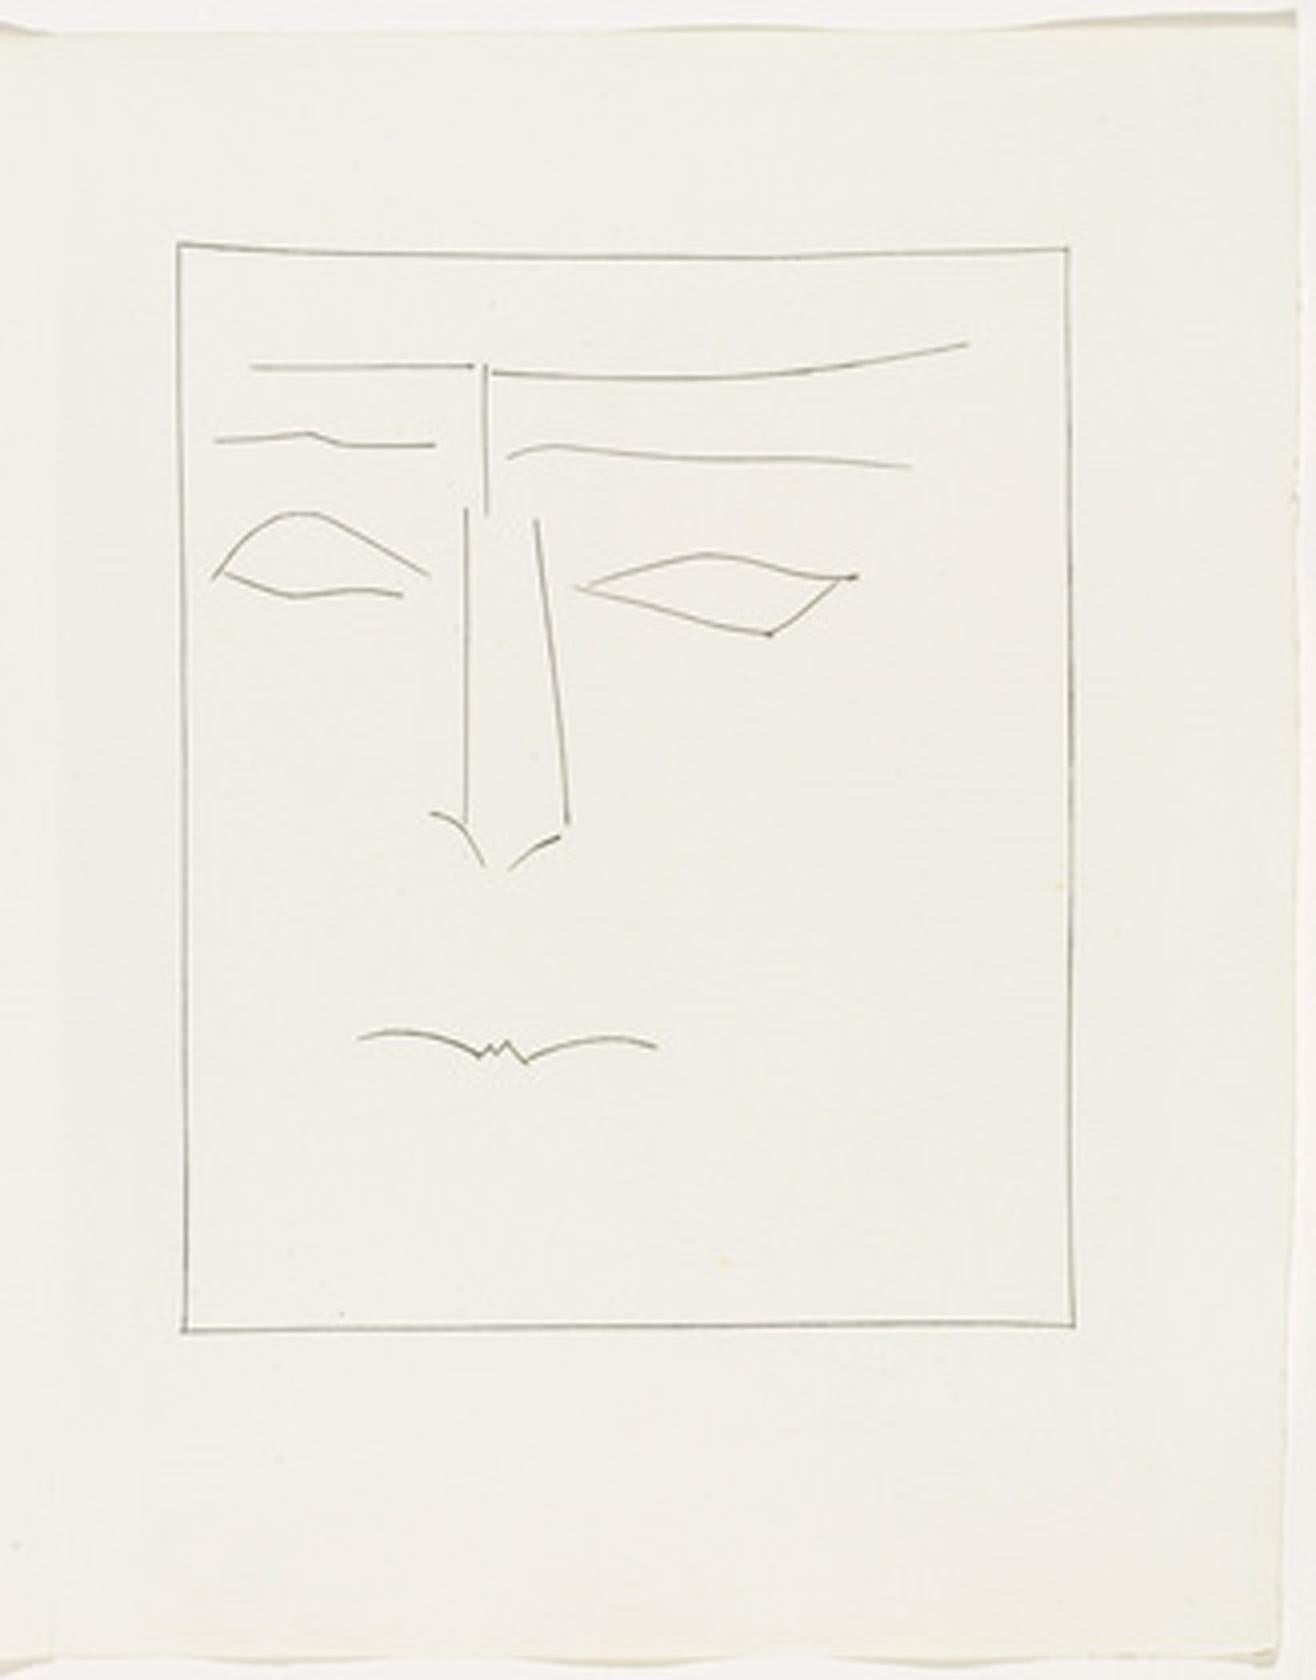 Pablo Picasso Portrait Print - Carmen Square Head of a Man with Clenched Mouth (Plate IX)